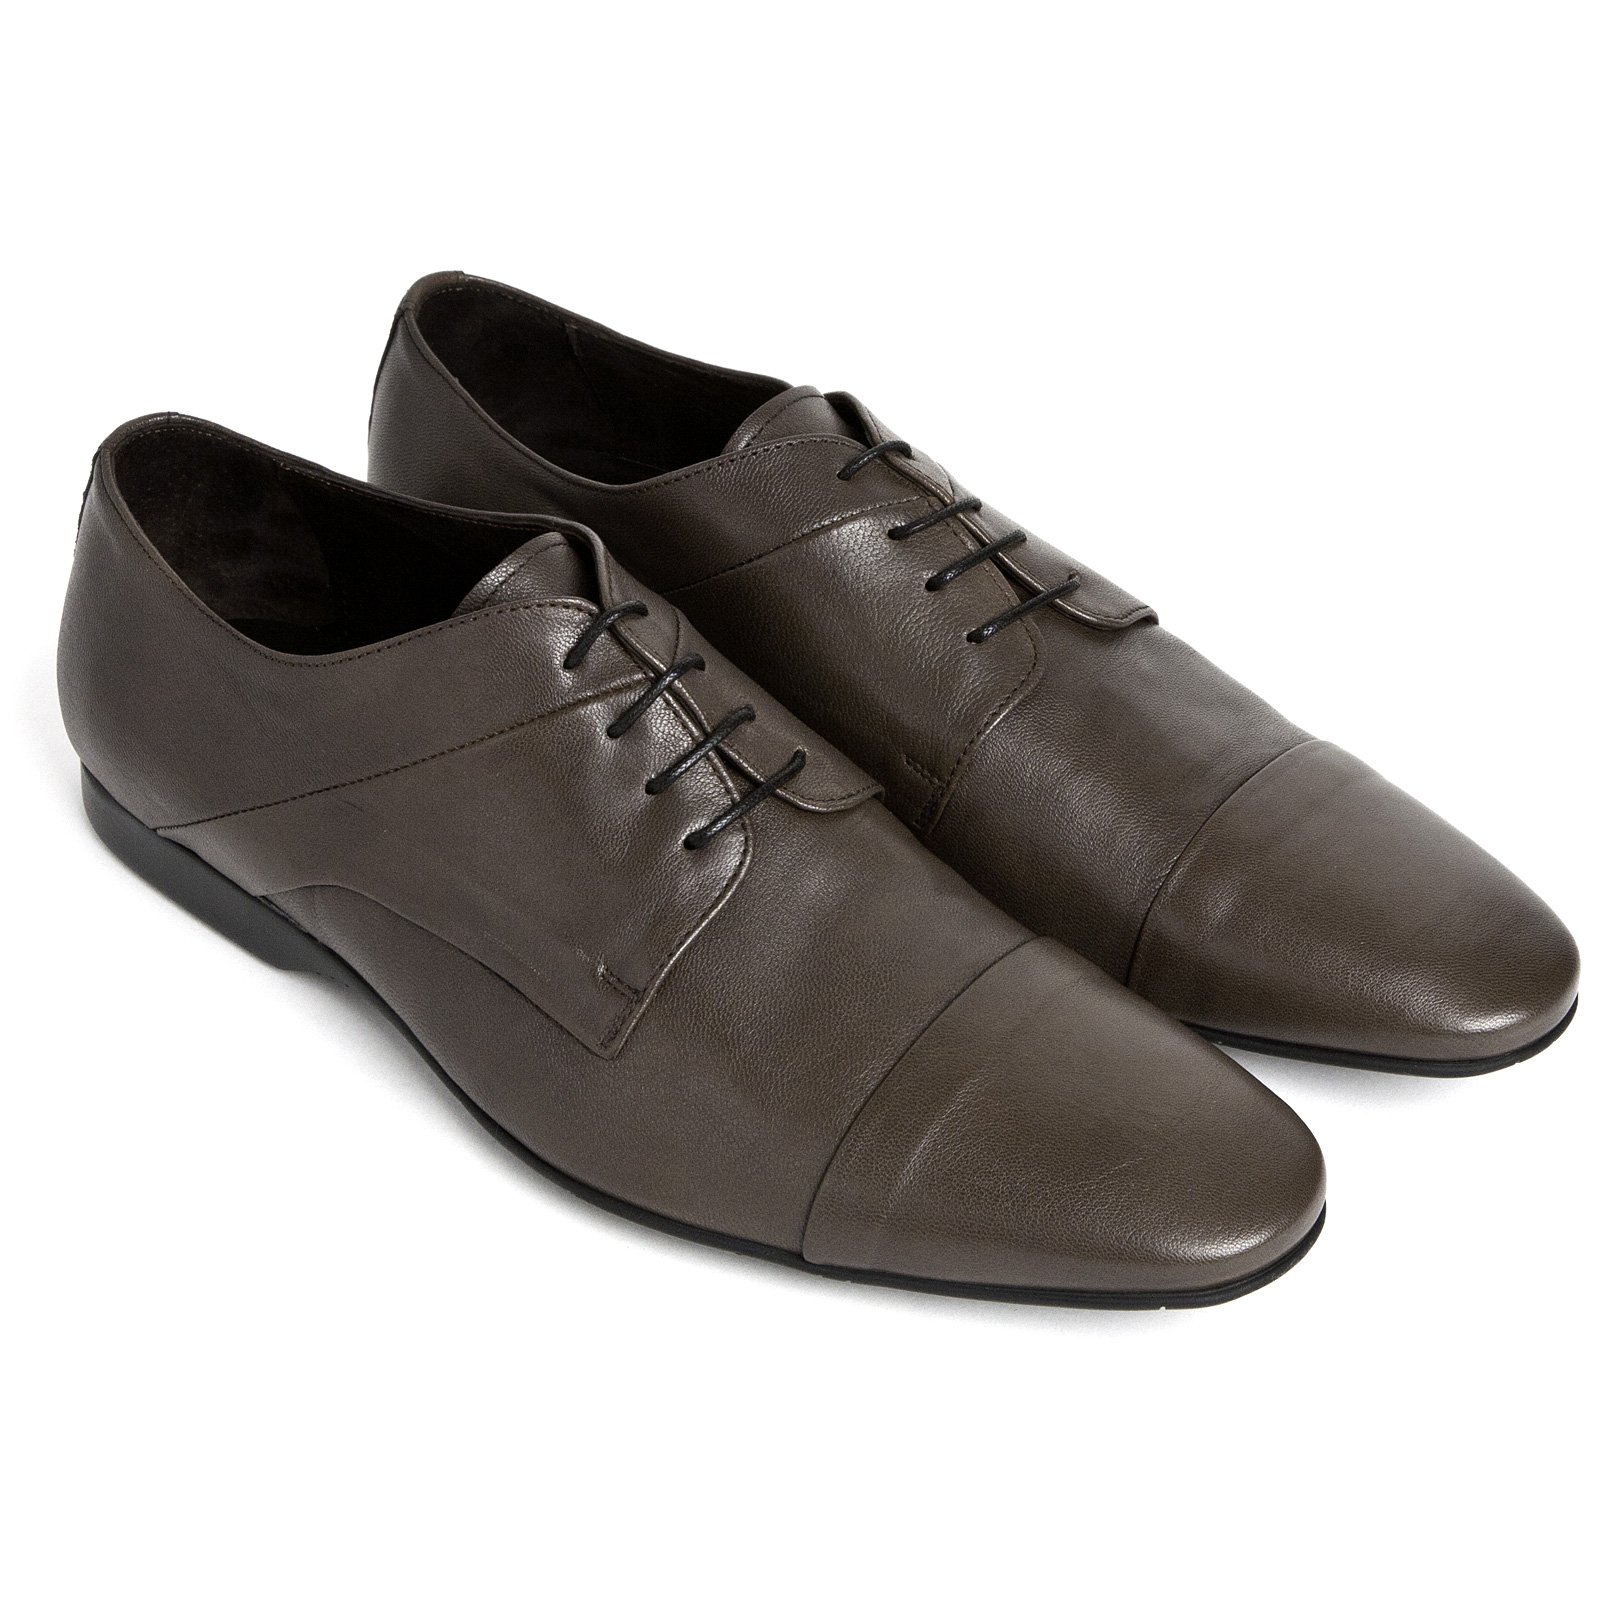 Rubber Sole Leather Lace Up - BRANDO 2012AW : Shoes & Boots-Dress Shoes ...